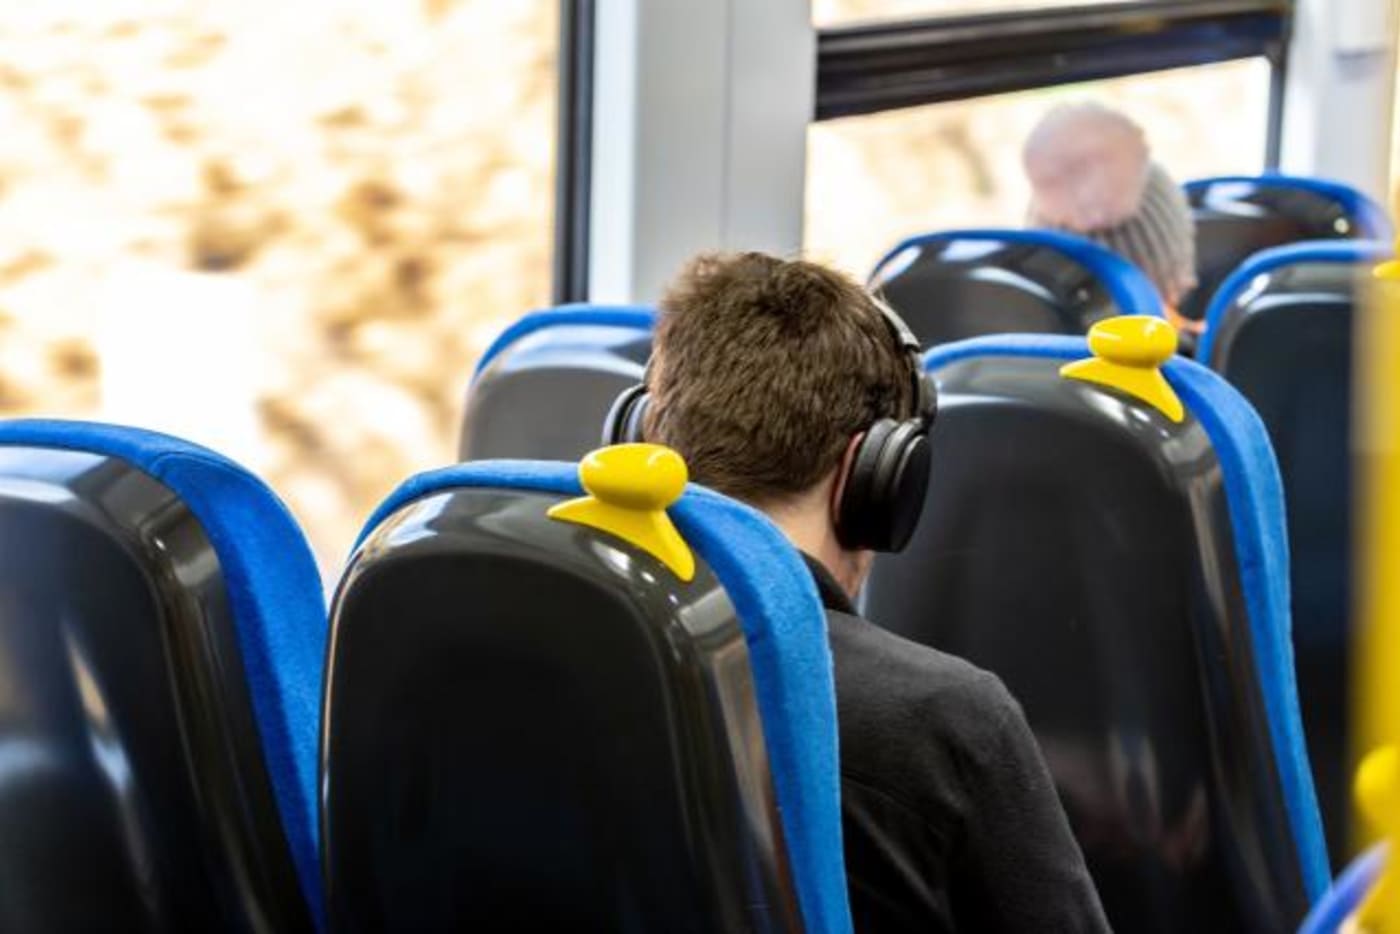 Train Bus Porn - UK Train Operator Asks Customers To Stop Watching Porn/NSFW Content |  Complex UK